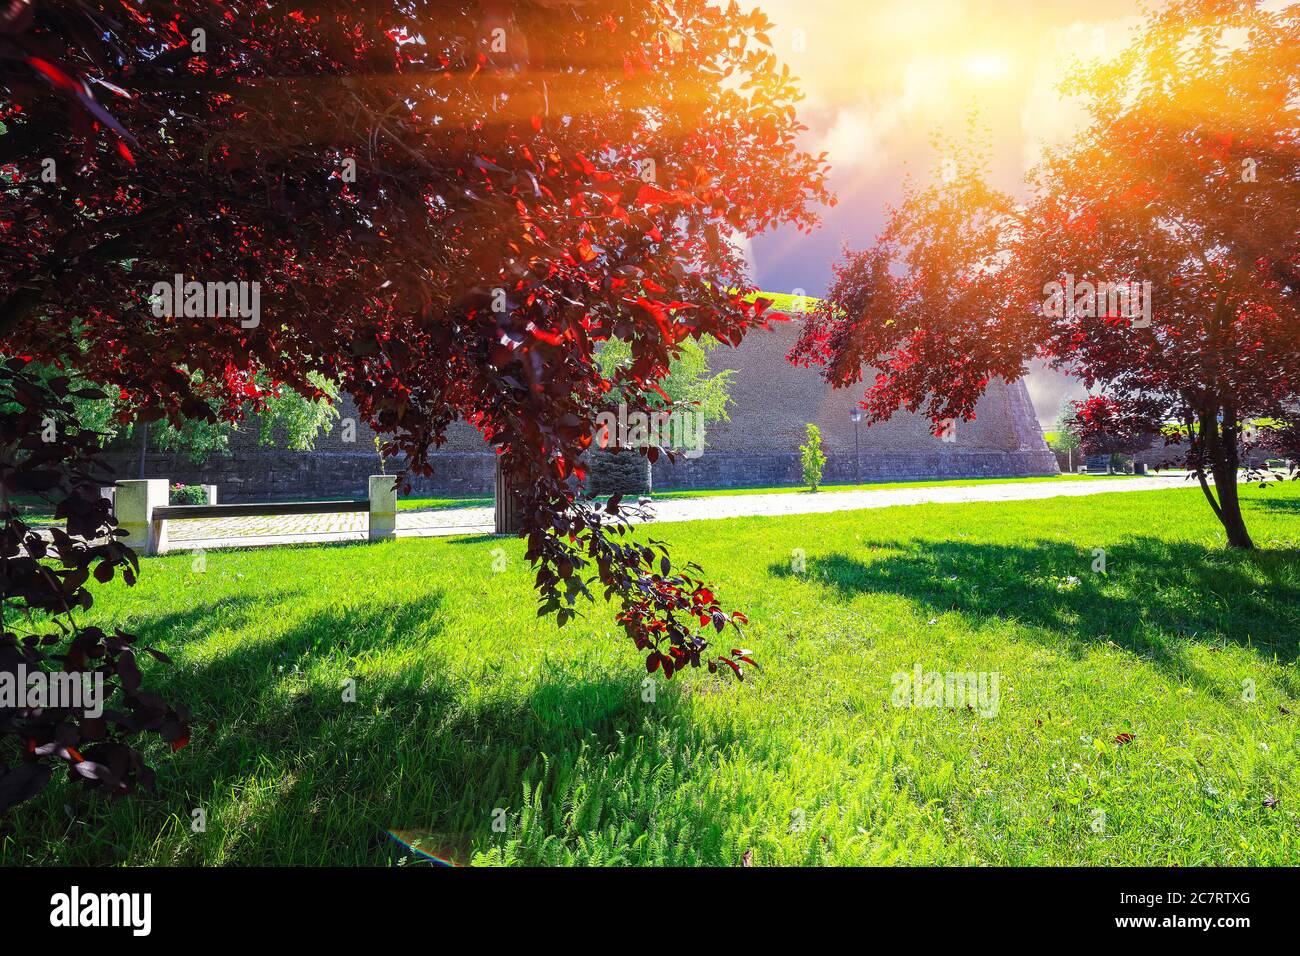 Scene with aged medieval defense fortification walls green lawn and red ornamental trees. Dramatic  summer scene of Transylvania, Alba Iulia city, Rom Stock Photo